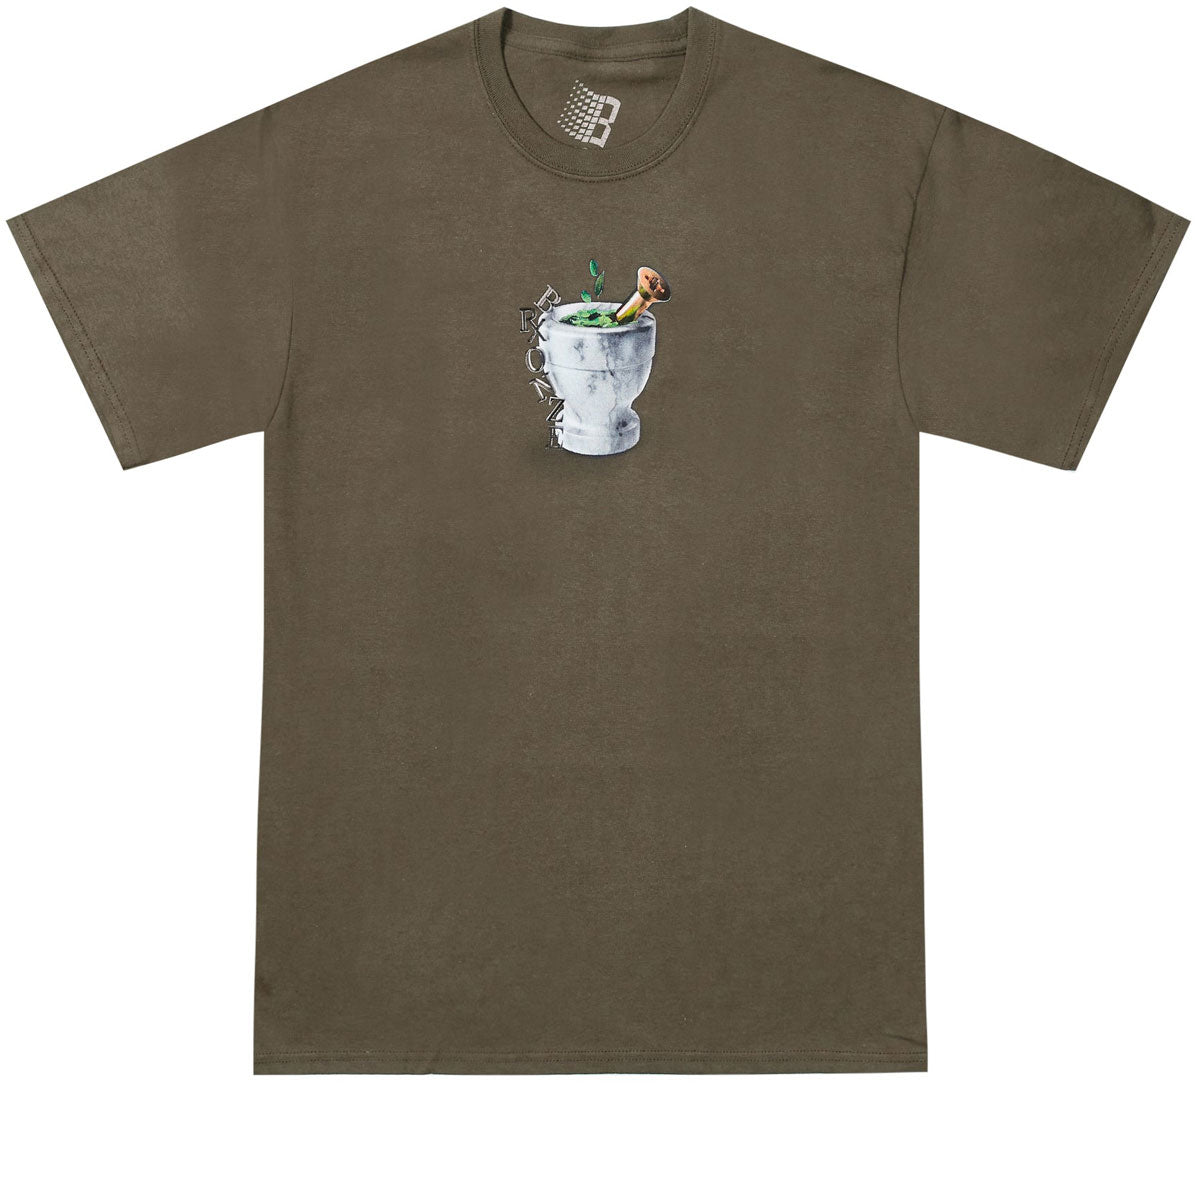 Bronze 56k Spices T-Shirt - Dusty Brown image 1